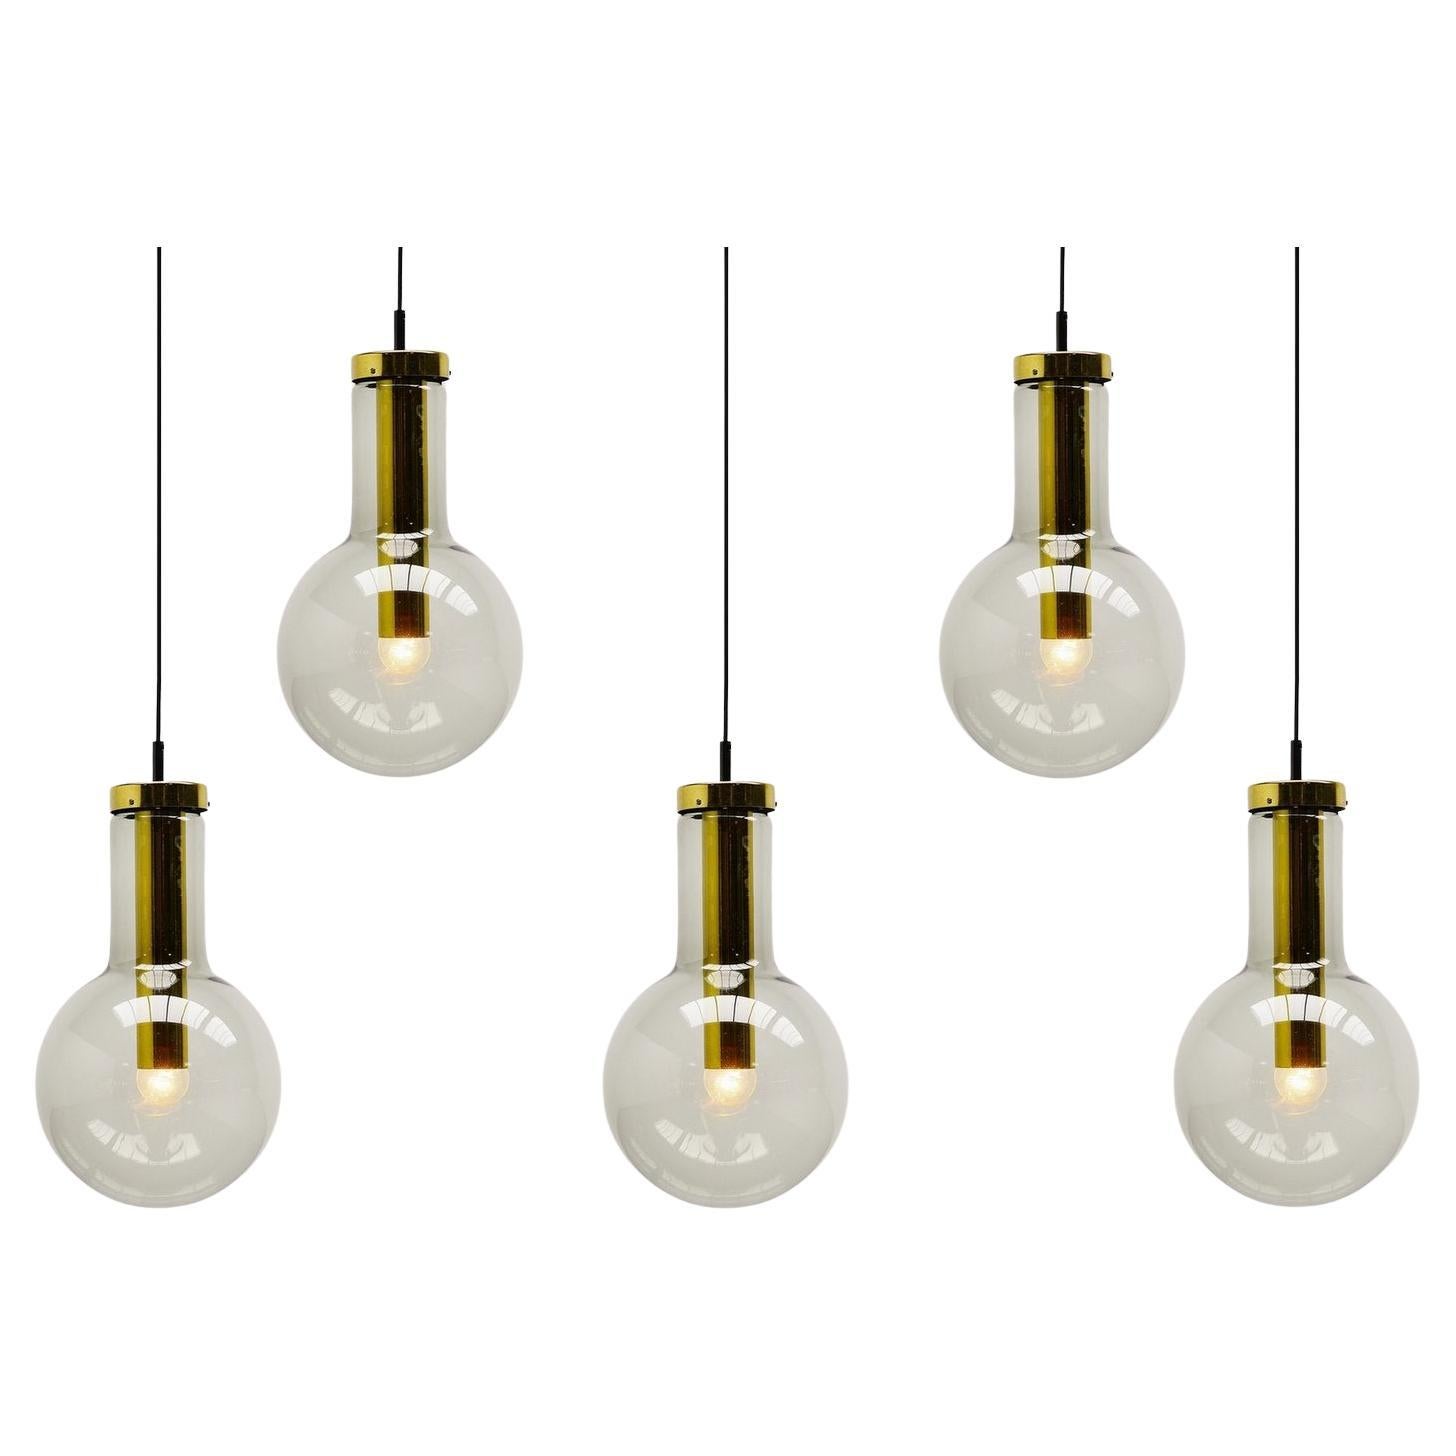 RAAK Amsterdam Maxi Globe Xl Pendant Lamps, The Netherlands 1965 For Sale